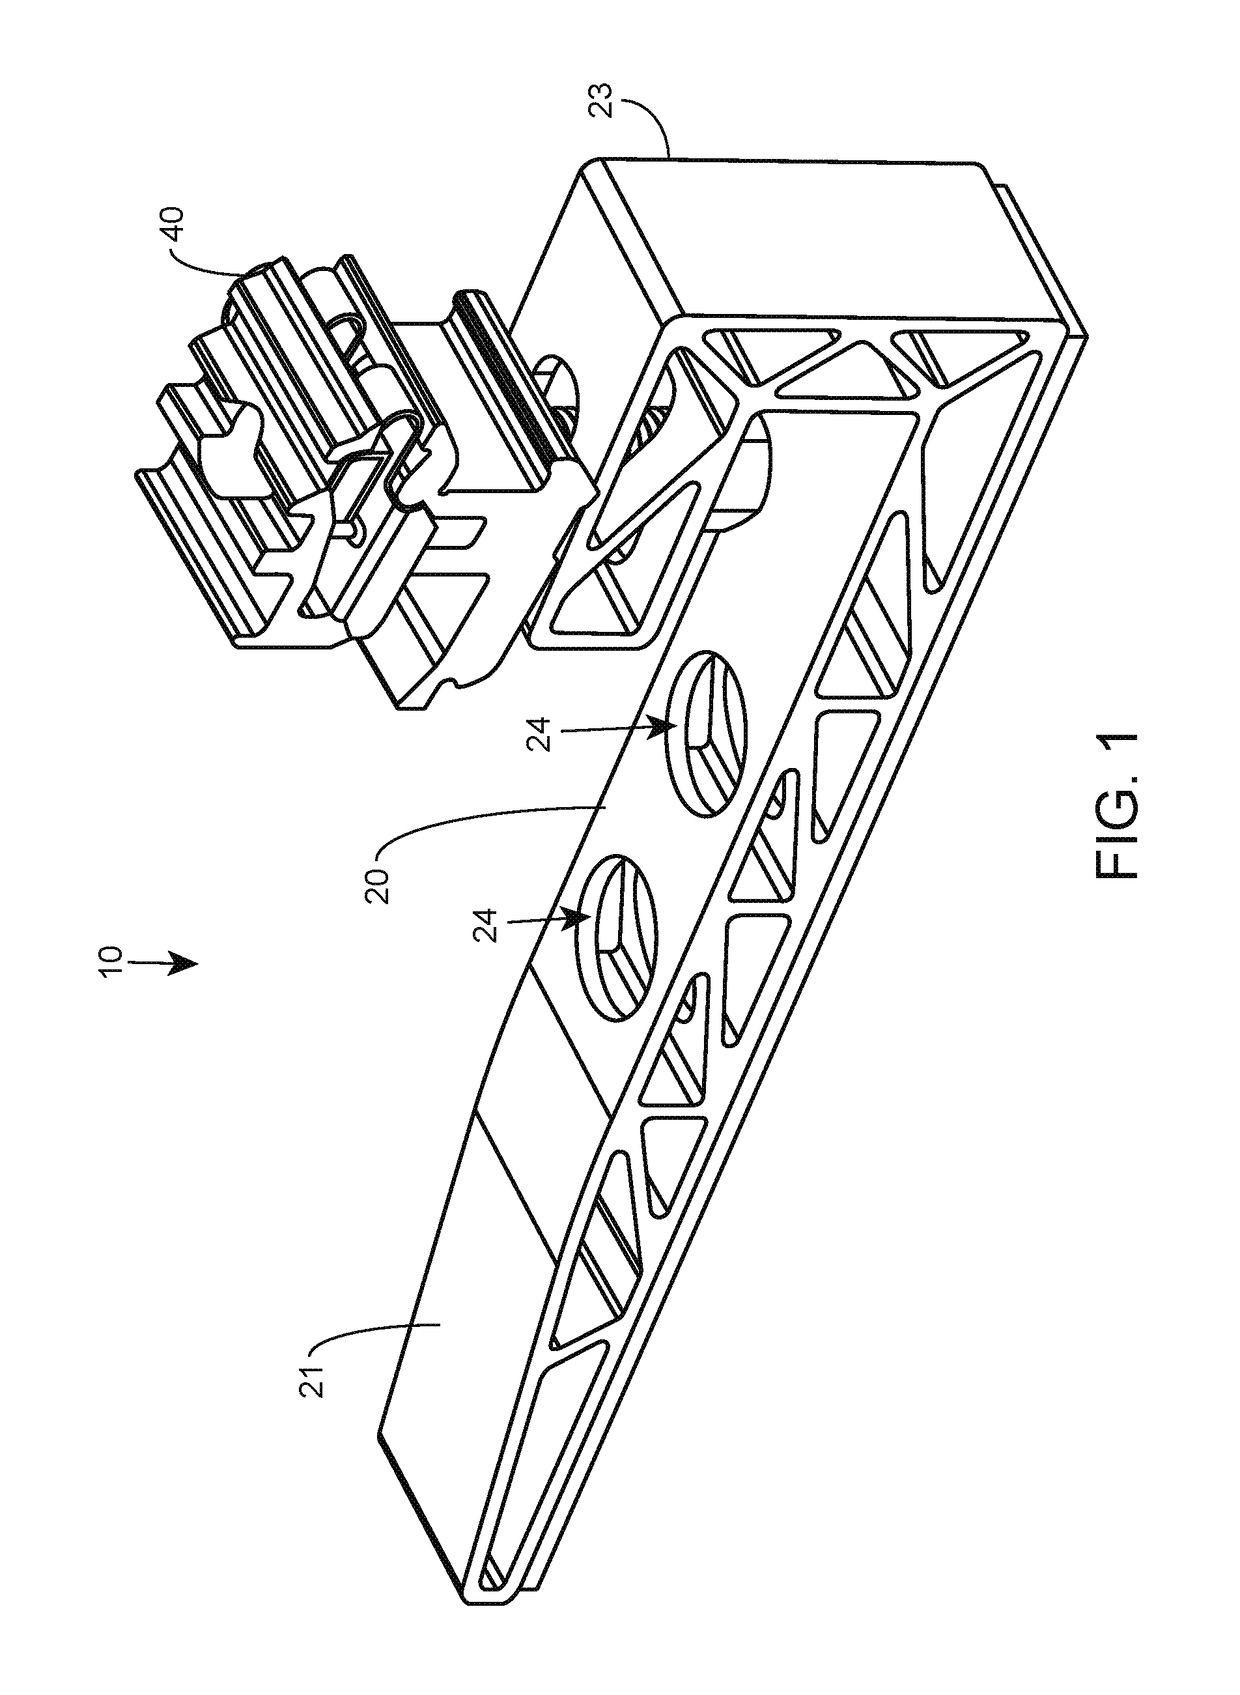 Photovoltaic mounting system